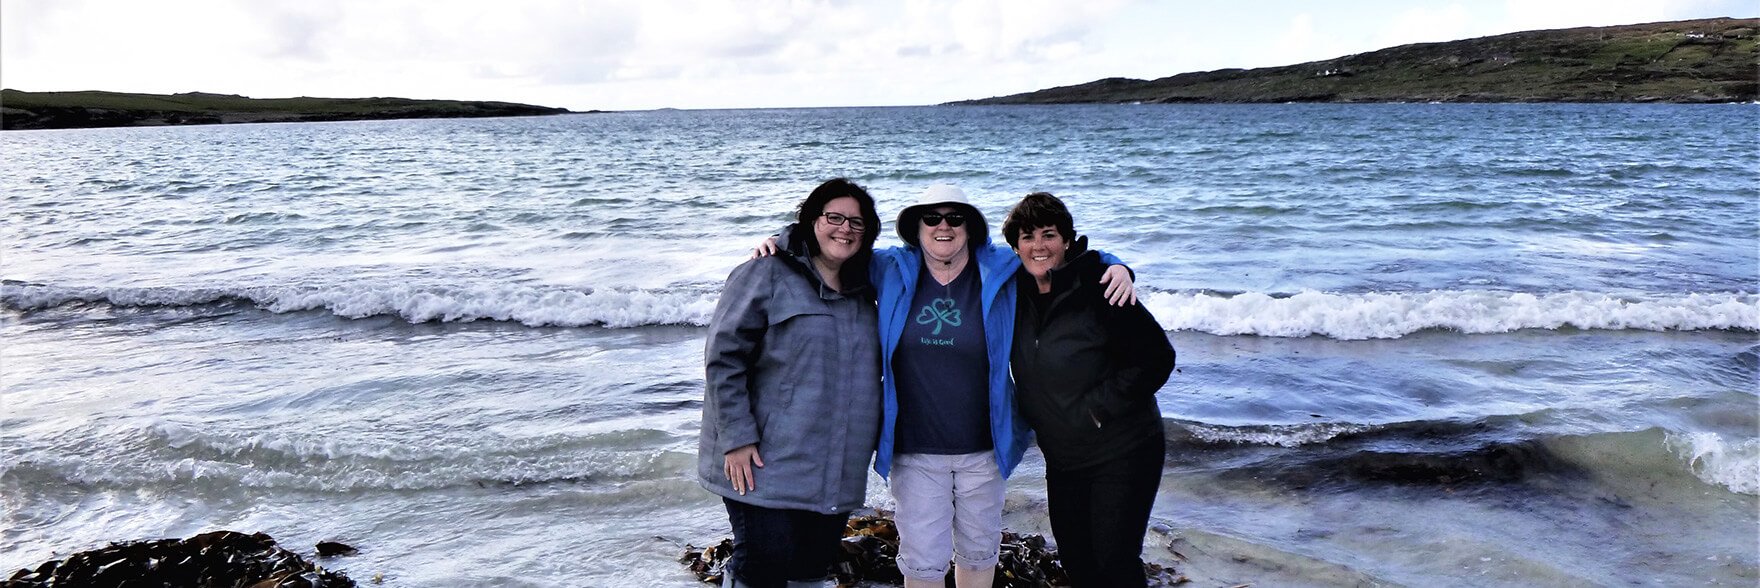 Three tour guests on a beach in Ireland